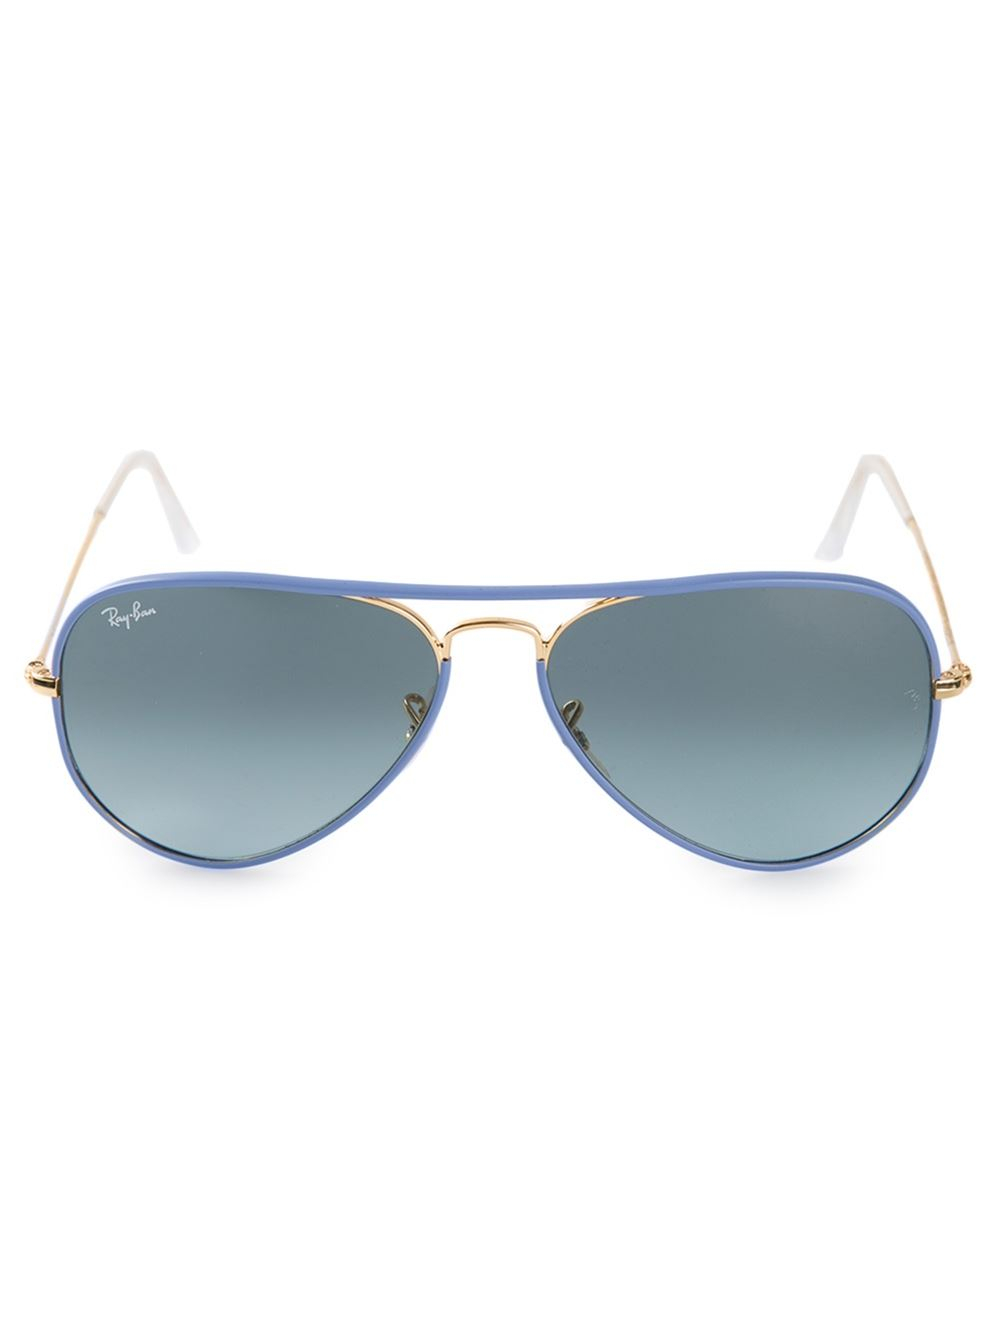 Ray Ban Aviator Full Color Sunglasses In Blue Lyst